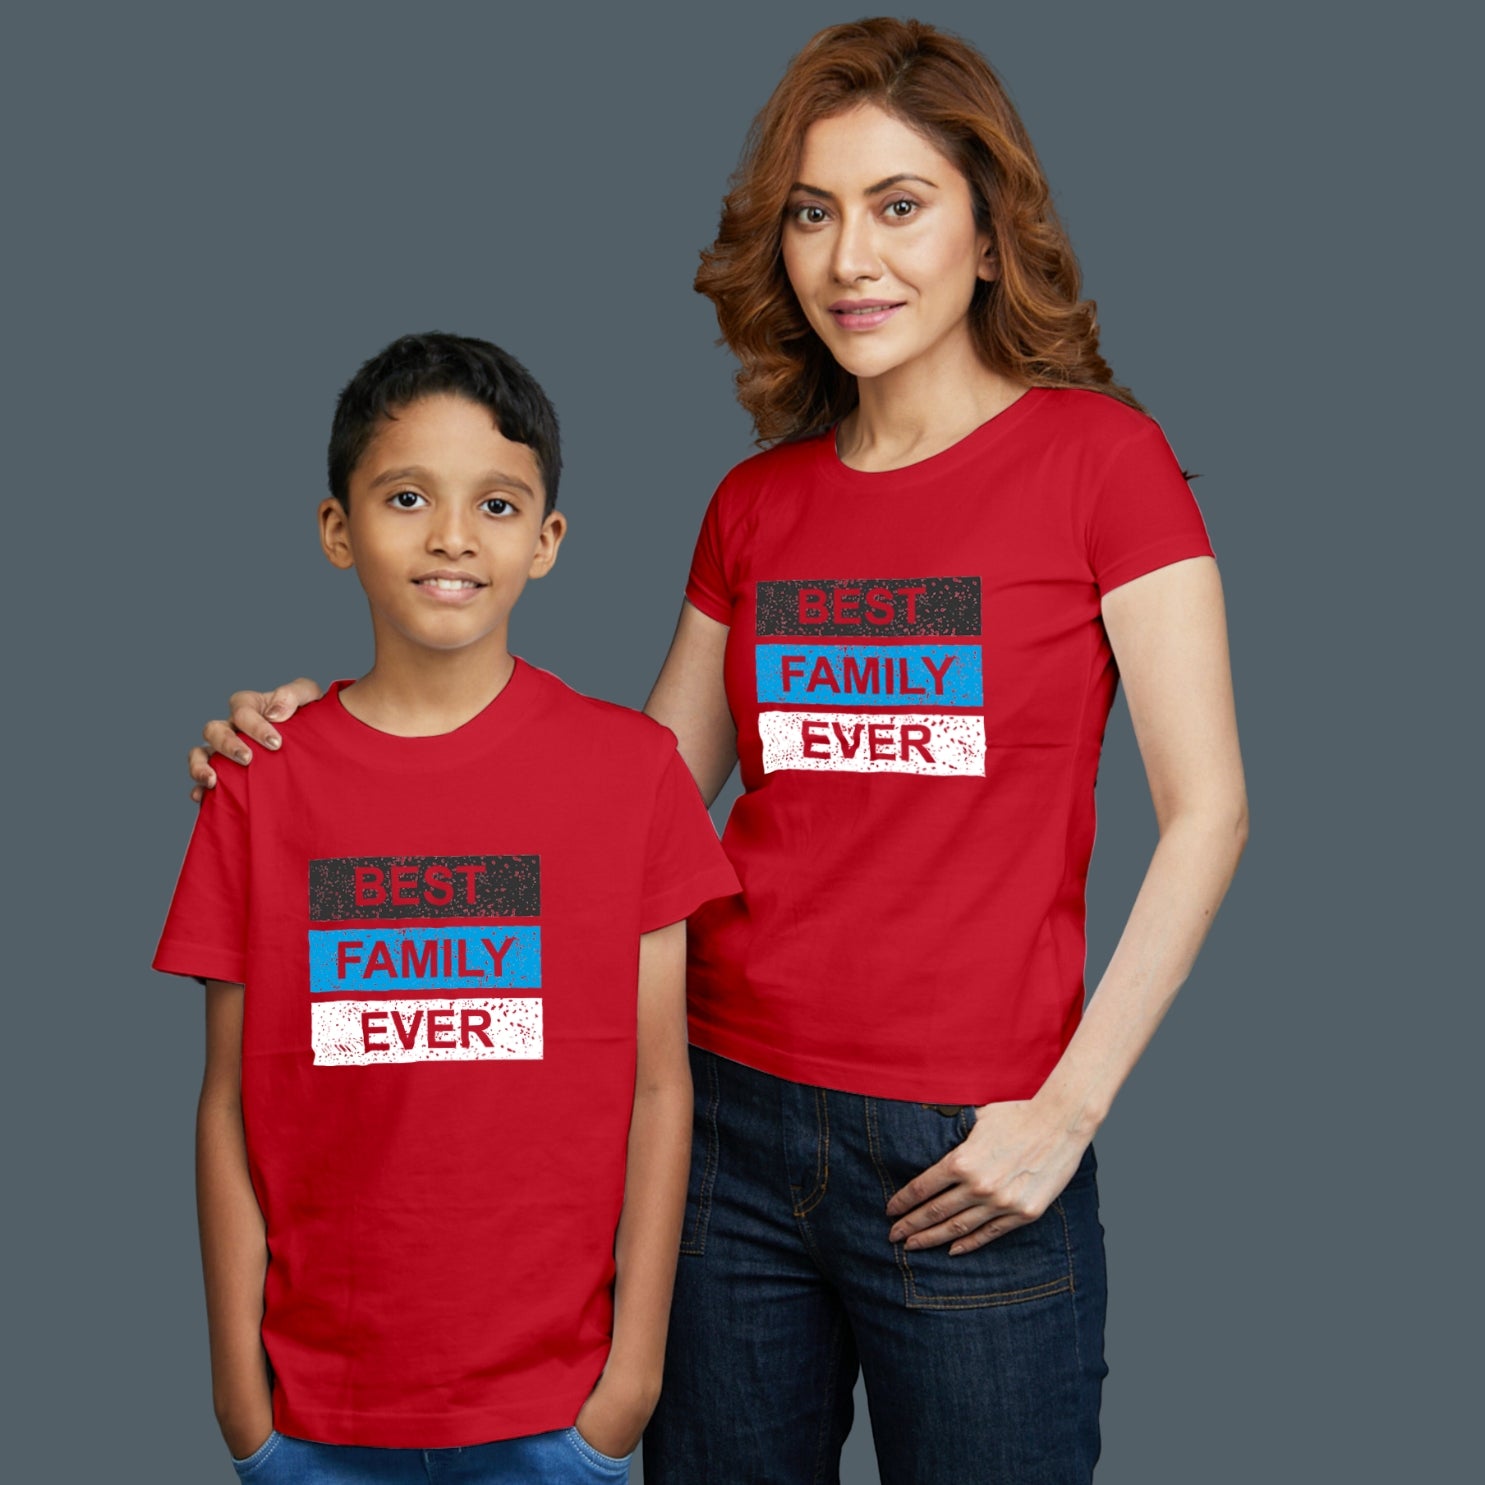 Family of 2 t shirt for Mom Son in Red Colour- Best Family Ever Variant